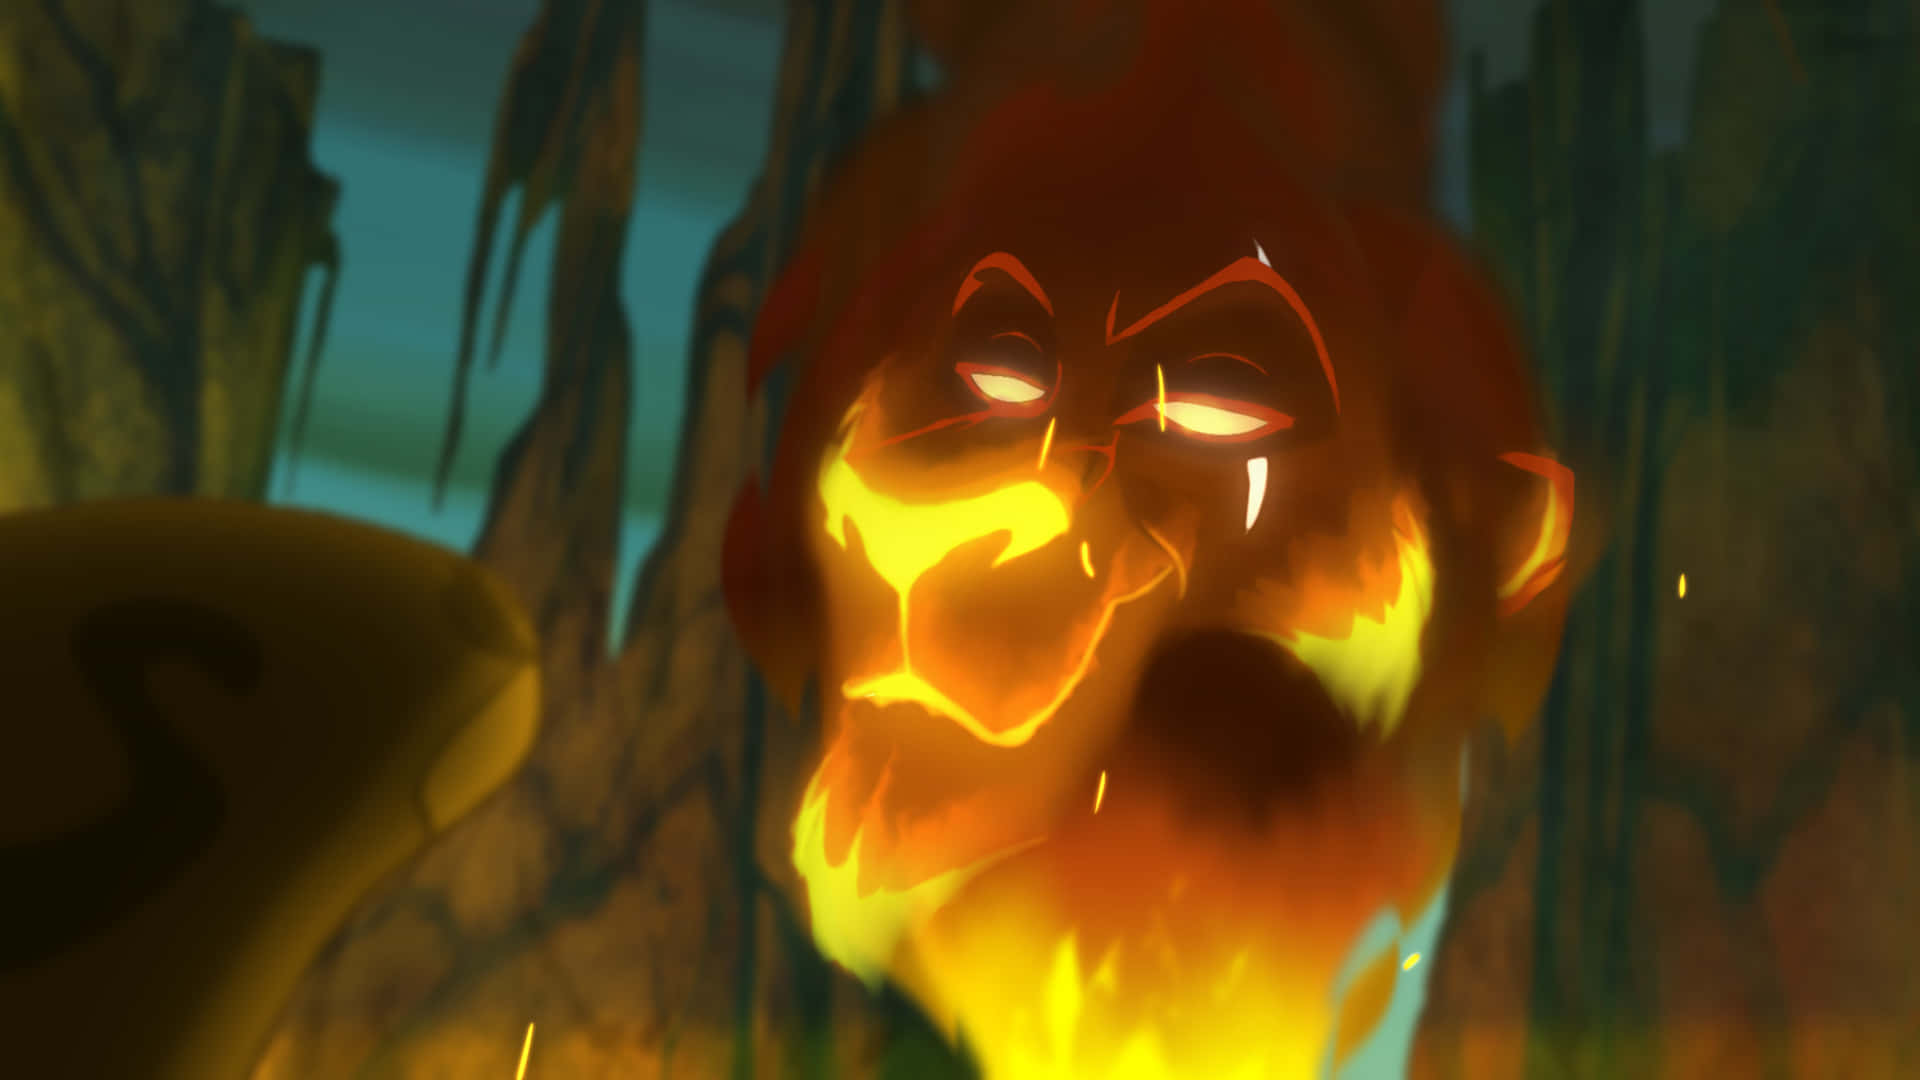 "Be Prepared" - Scar from The Lion King Wallpaper